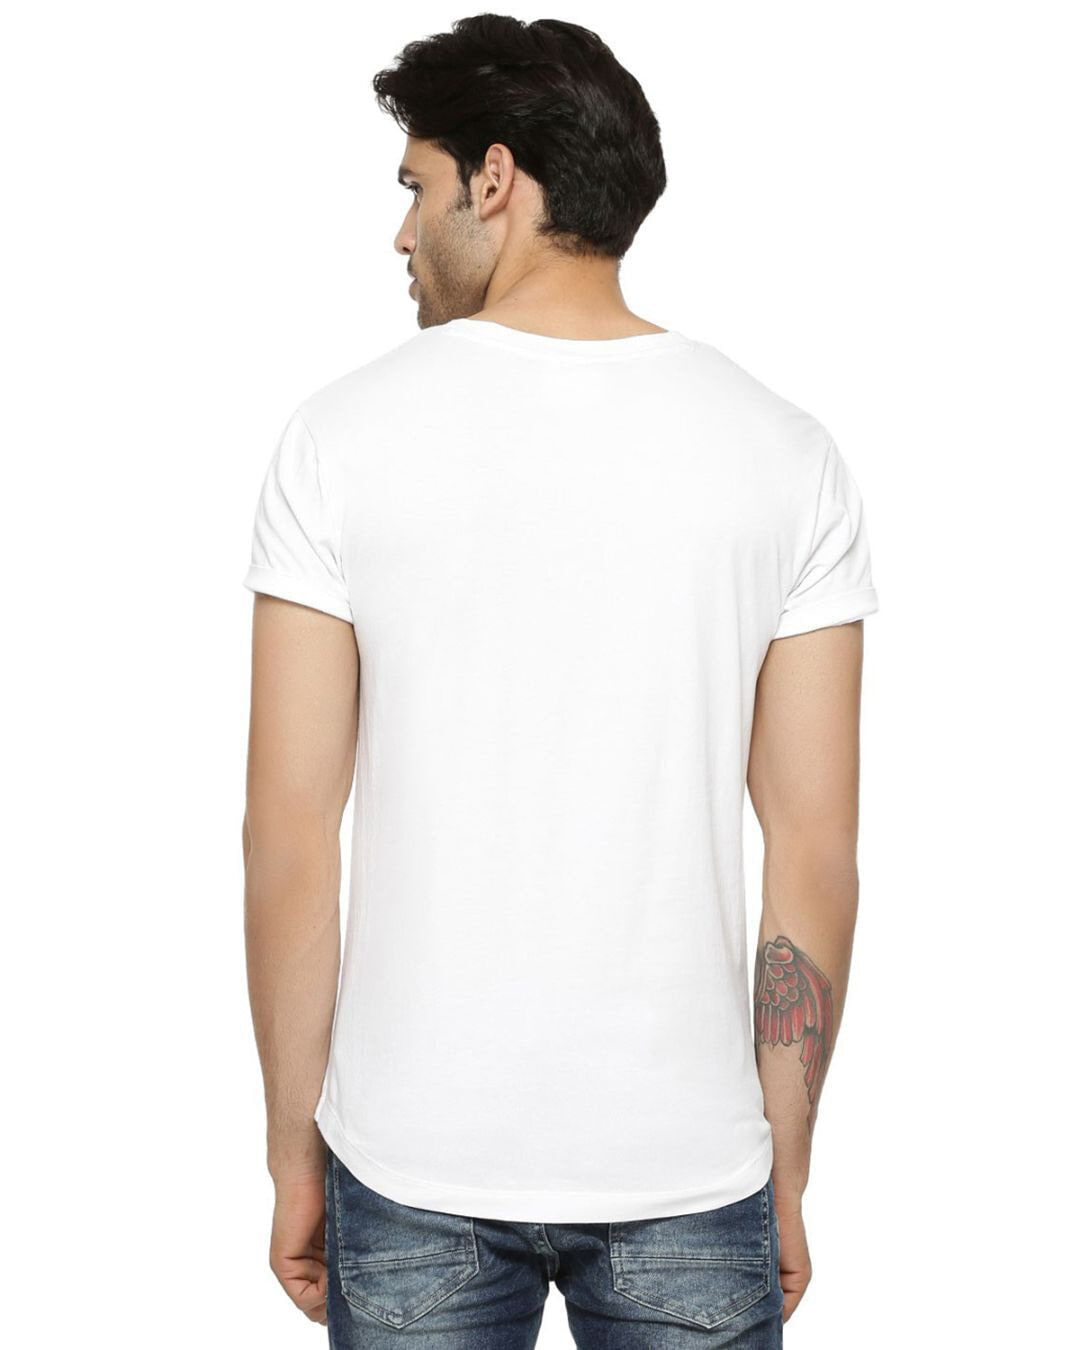 Shop Be Yourself Printed T-shirts for Men's-Back